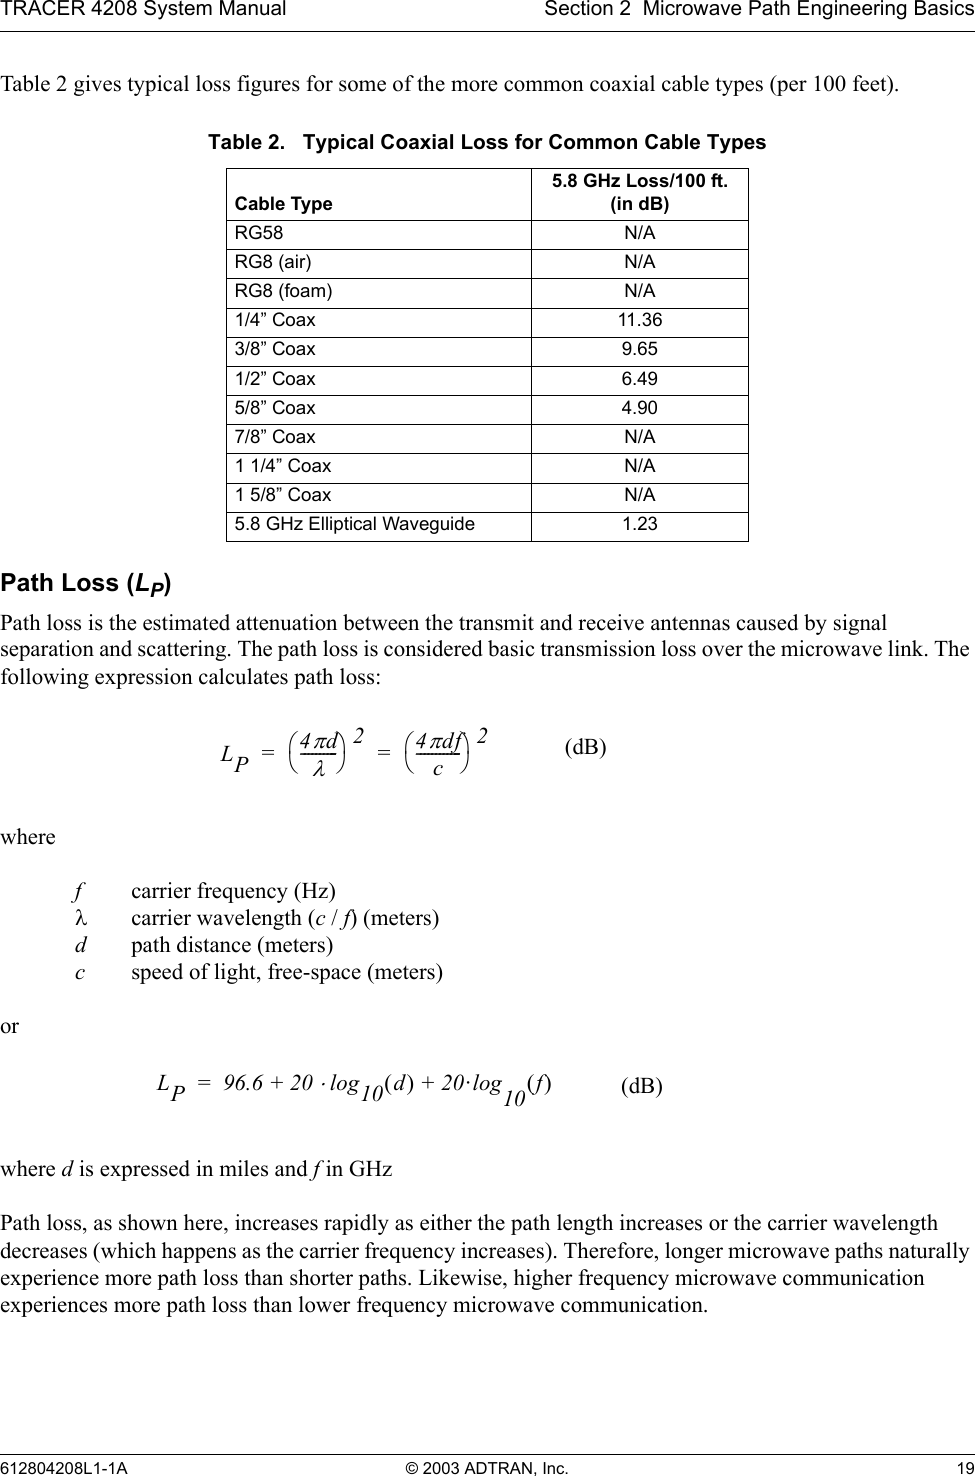 TRACER 4208 System Manual Section 2  Microwave Path Engineering Basics612804208L1-1A © 2003 ADTRAN, Inc. 19Table 2 gives typical loss figures for some of the more common coaxial cable types (per 100 feet).Path Loss (LP)Path loss is the estimated attenuation between the transmit and receive antennas caused by signal separation and scattering. The path loss is considered basic transmission loss over the microwave link. The following expression calculates path loss:where fcarrier frequency (Hz)λcarrier wavelength (c / f) (meters)dpath distance (meters)cspeed of light, free-space (meters)orwhere d is expressed in miles and f in GHzPath loss, as shown here, increases rapidly as either the path length increases or the carrier wavelength decreases (which happens as the carrier frequency increases). Therefore, longer microwave paths naturally experience more path loss than shorter paths. Likewise, higher frequency microwave communication experiences more path loss than lower frequency microwave communication.Table 2.   Typical Coaxial Loss for Common Cable TypesCable Type5.8 GHz Loss/100 ft. (in dB)RG58 N/ARG8 (air) N/ARG8 (foam) N/A1/4” Coax 11.363/8” Coax 9.651/2” Coax 6.495/8” Coax 4.907/8” Coax N/A1 1/4” Coax N/A1 5/8” Coax N/A5.8 GHz Elliptical Waveguide 1.23LP4πdλ----------24πdfc------------2== (dB)LP96.6 20 log10 d() 20·log+10 f()⋅+= (dB)